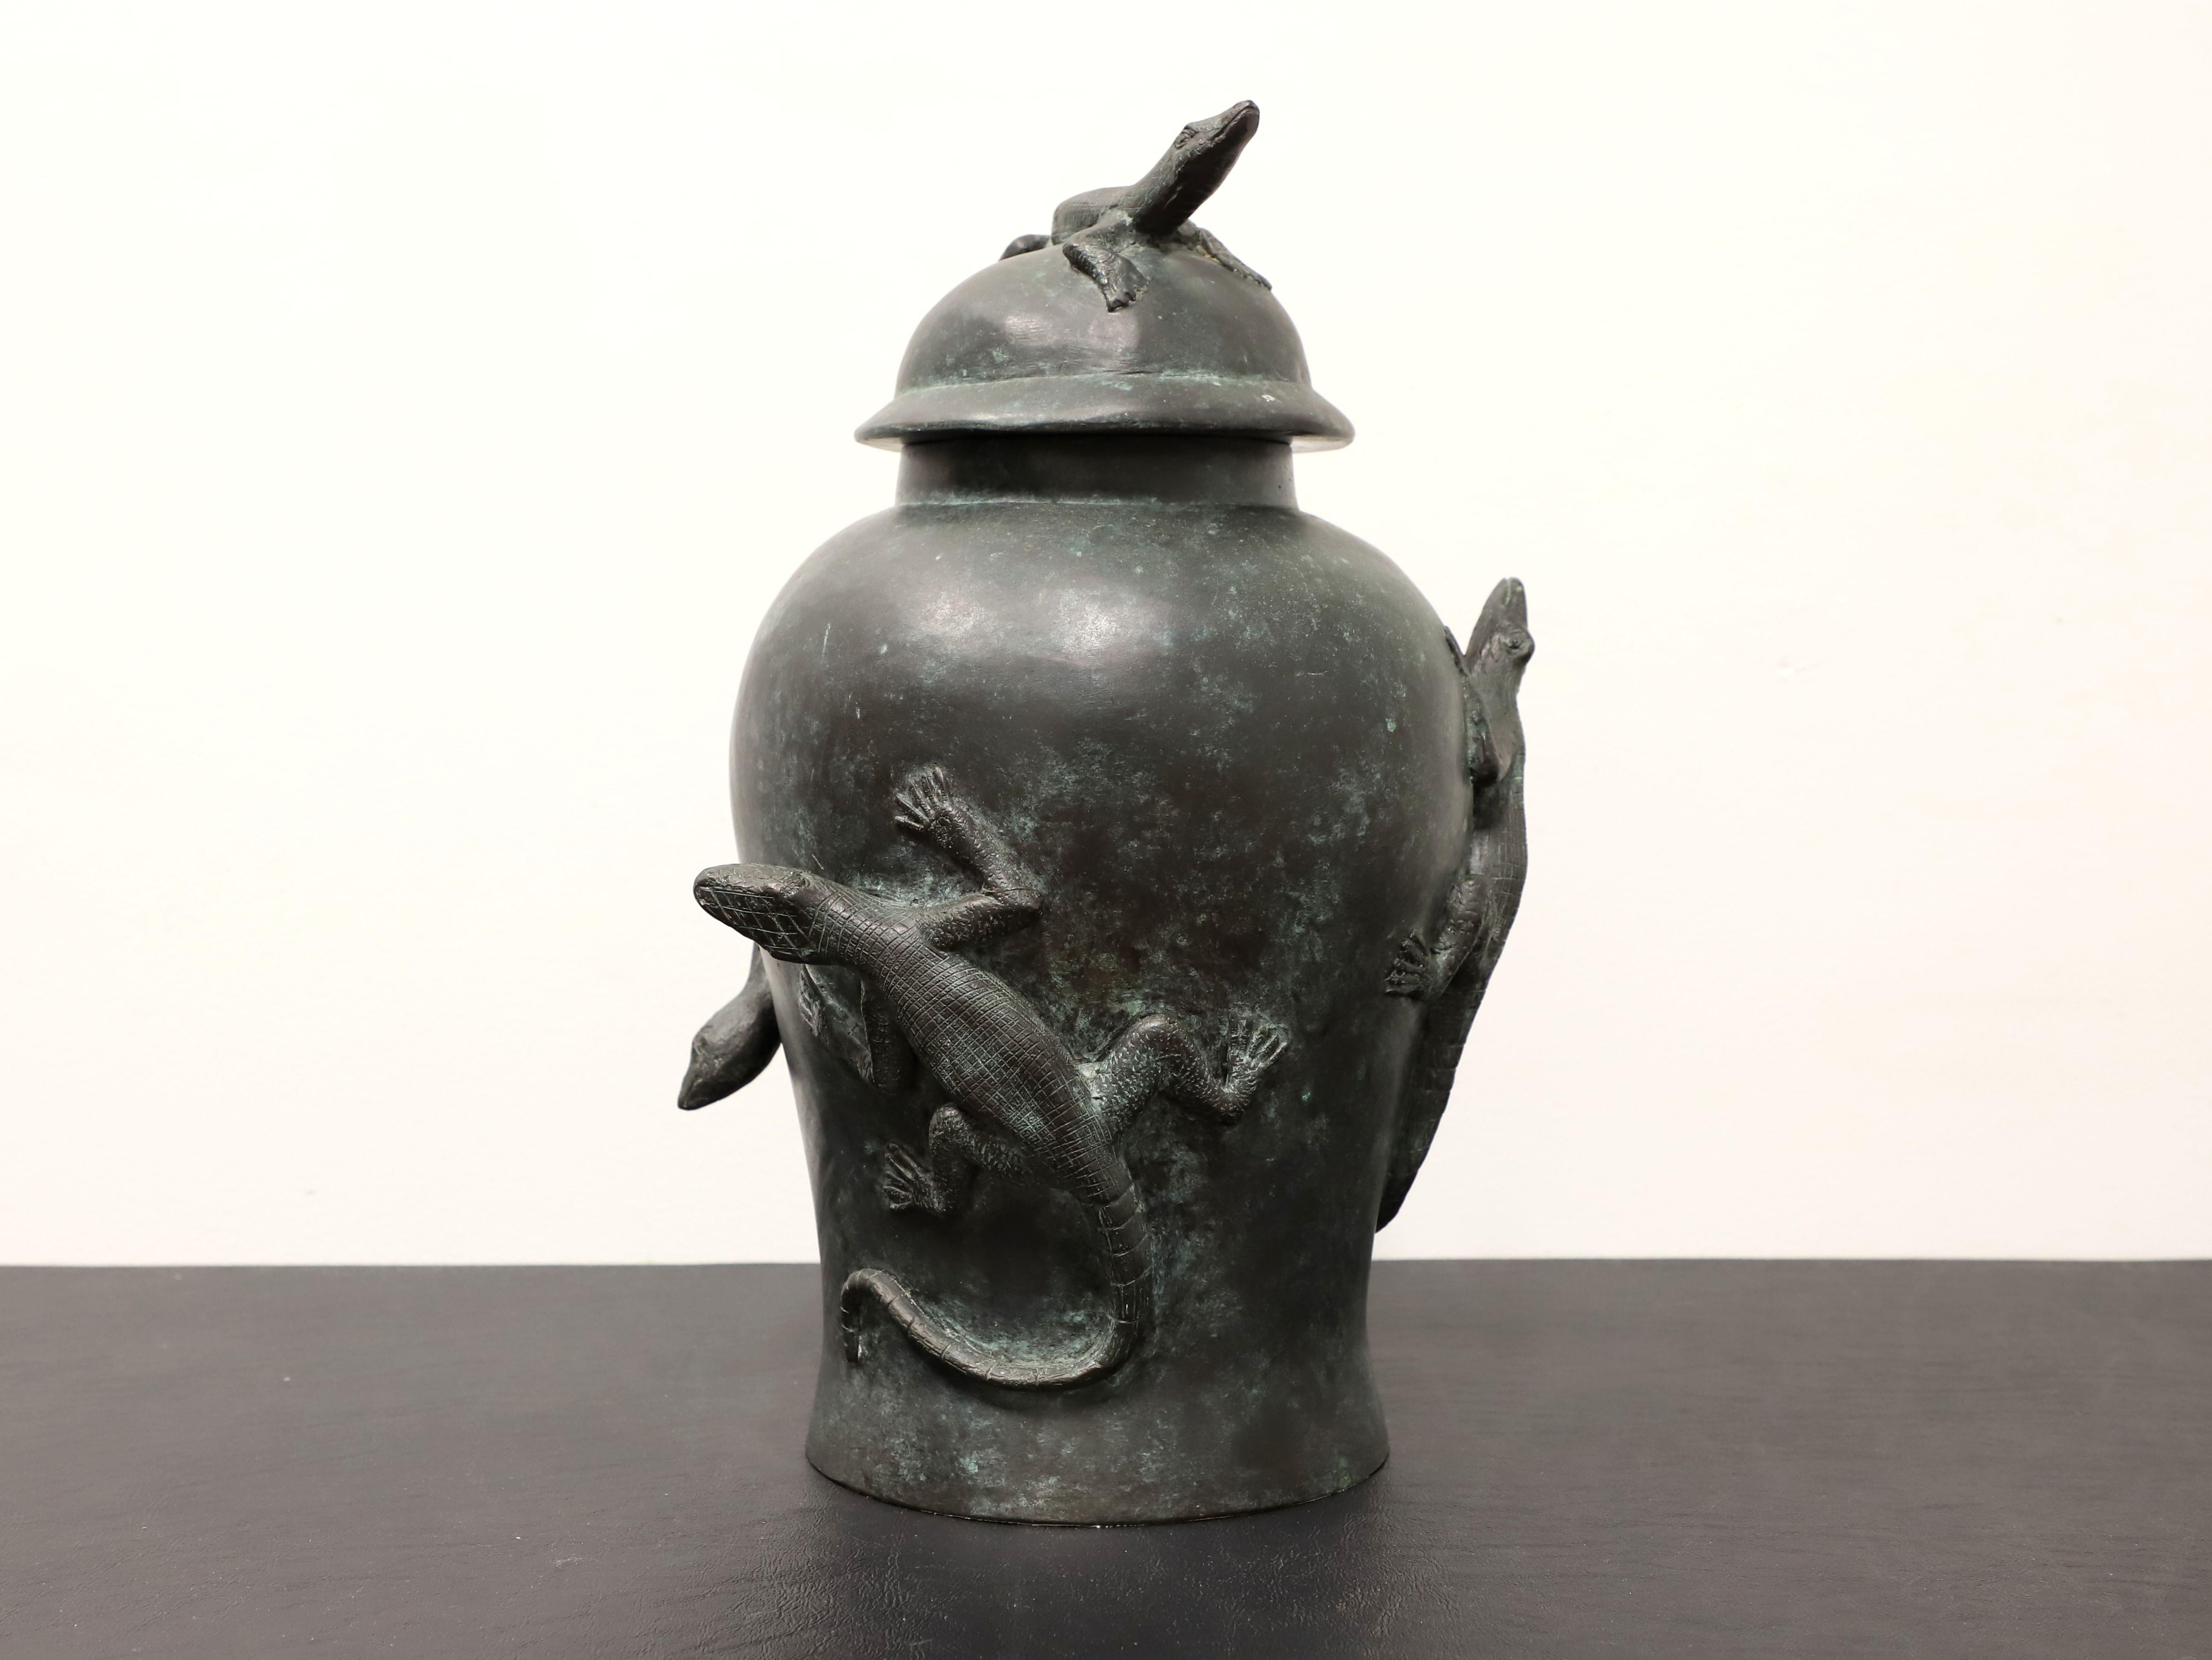 A table top urn in bronze with lid by Maitland Smith. Cast bronze with a patinated hue and lizards motif. Hand made in Thailand, in the late 20th Century. 

Measures:  11.25w 10d 16h, Weighs Approximately:  20 lbs

Outstanding condition with signs